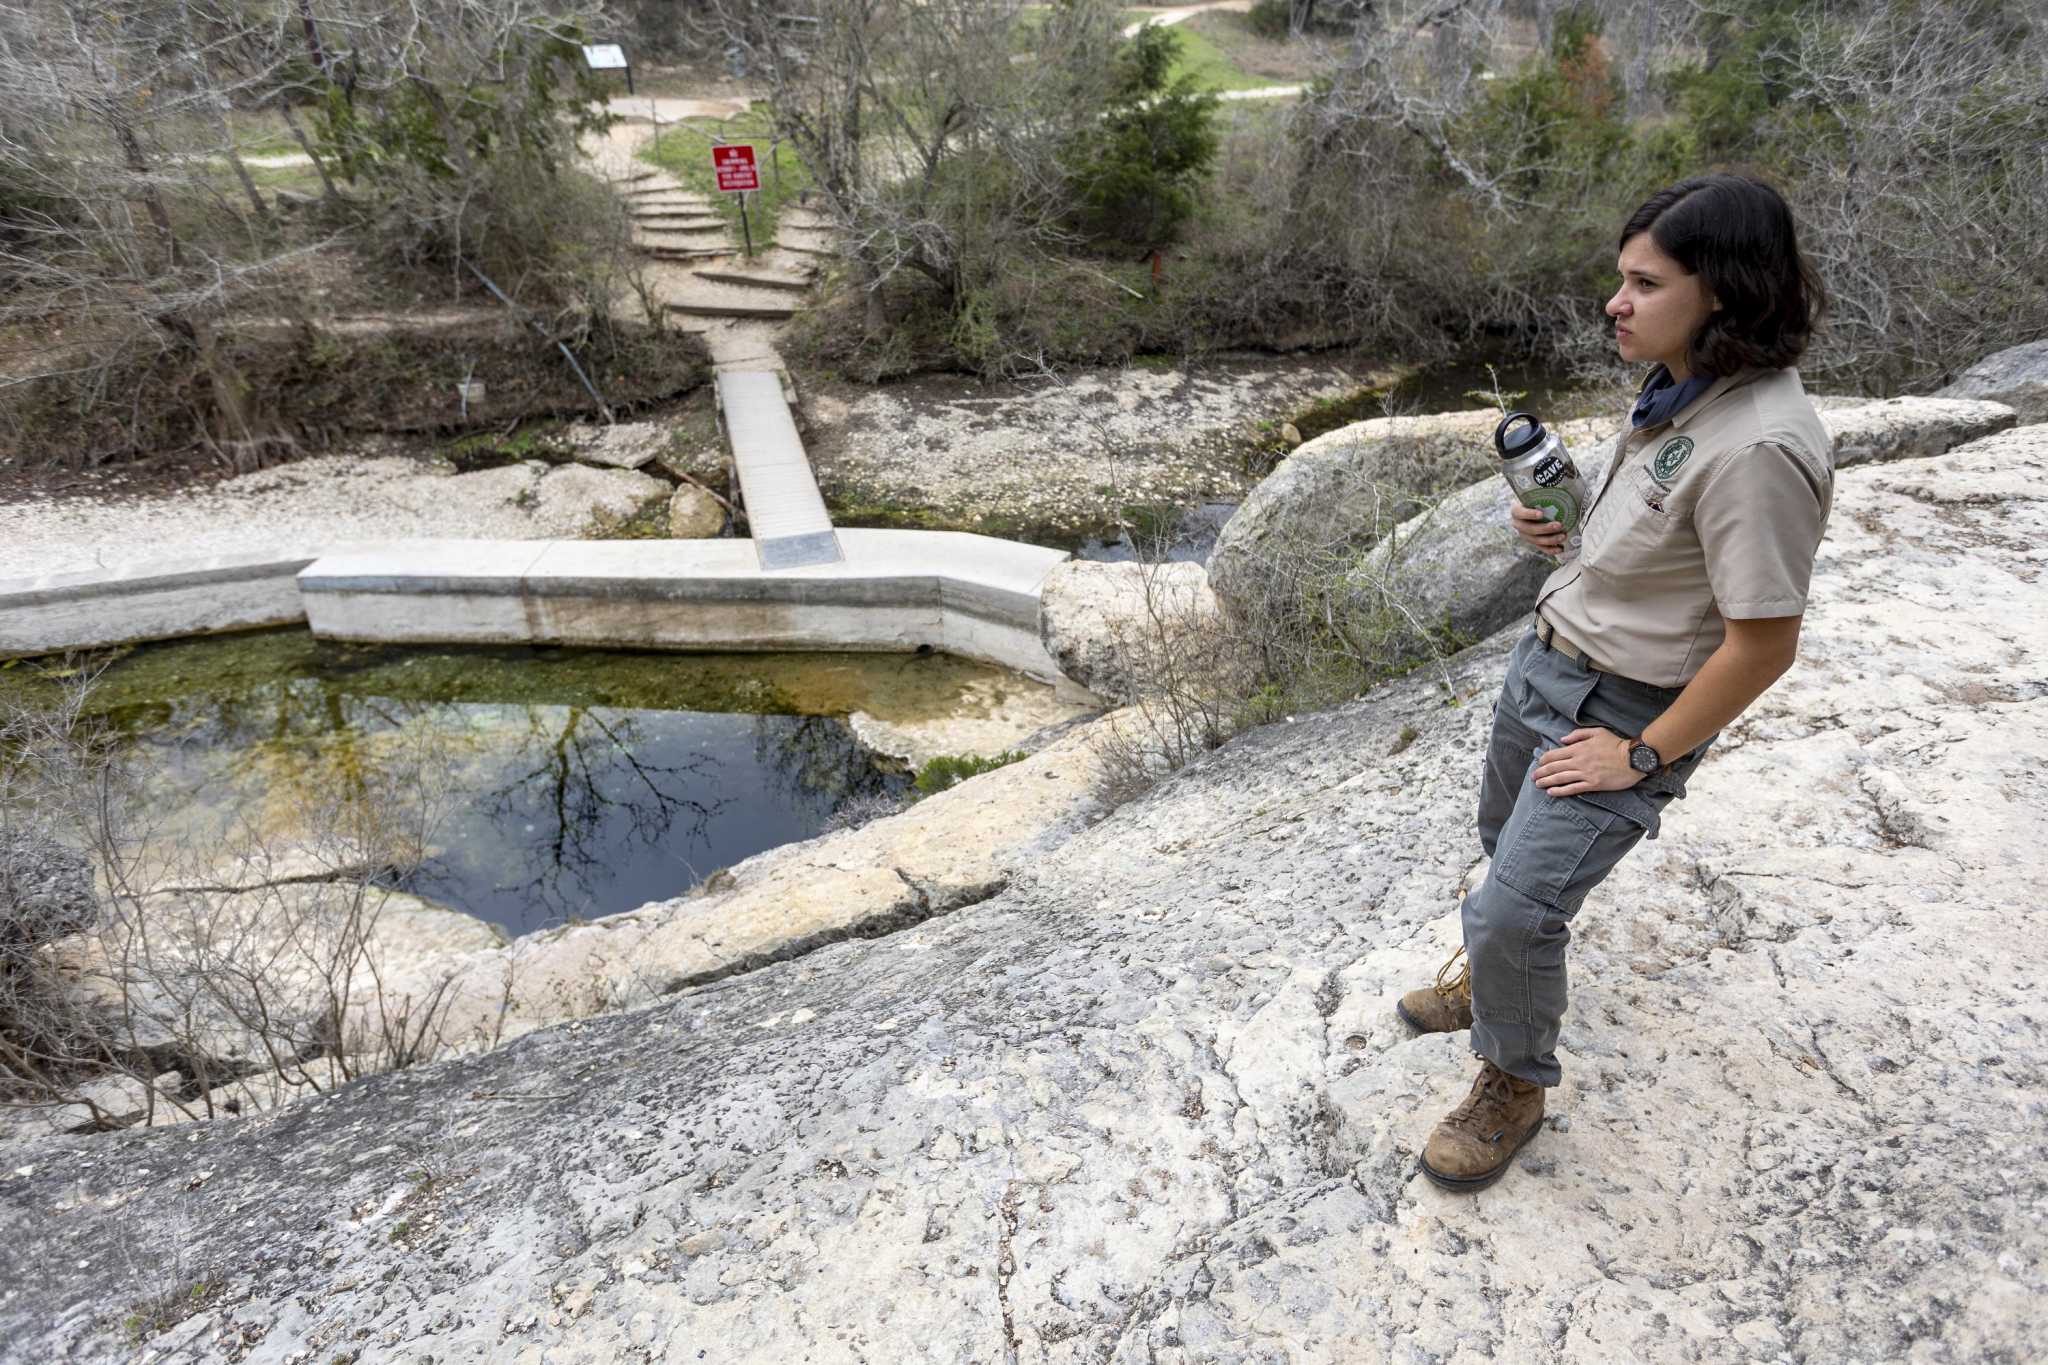 Wimberley and Aqua Texas locked in battle over sewage system